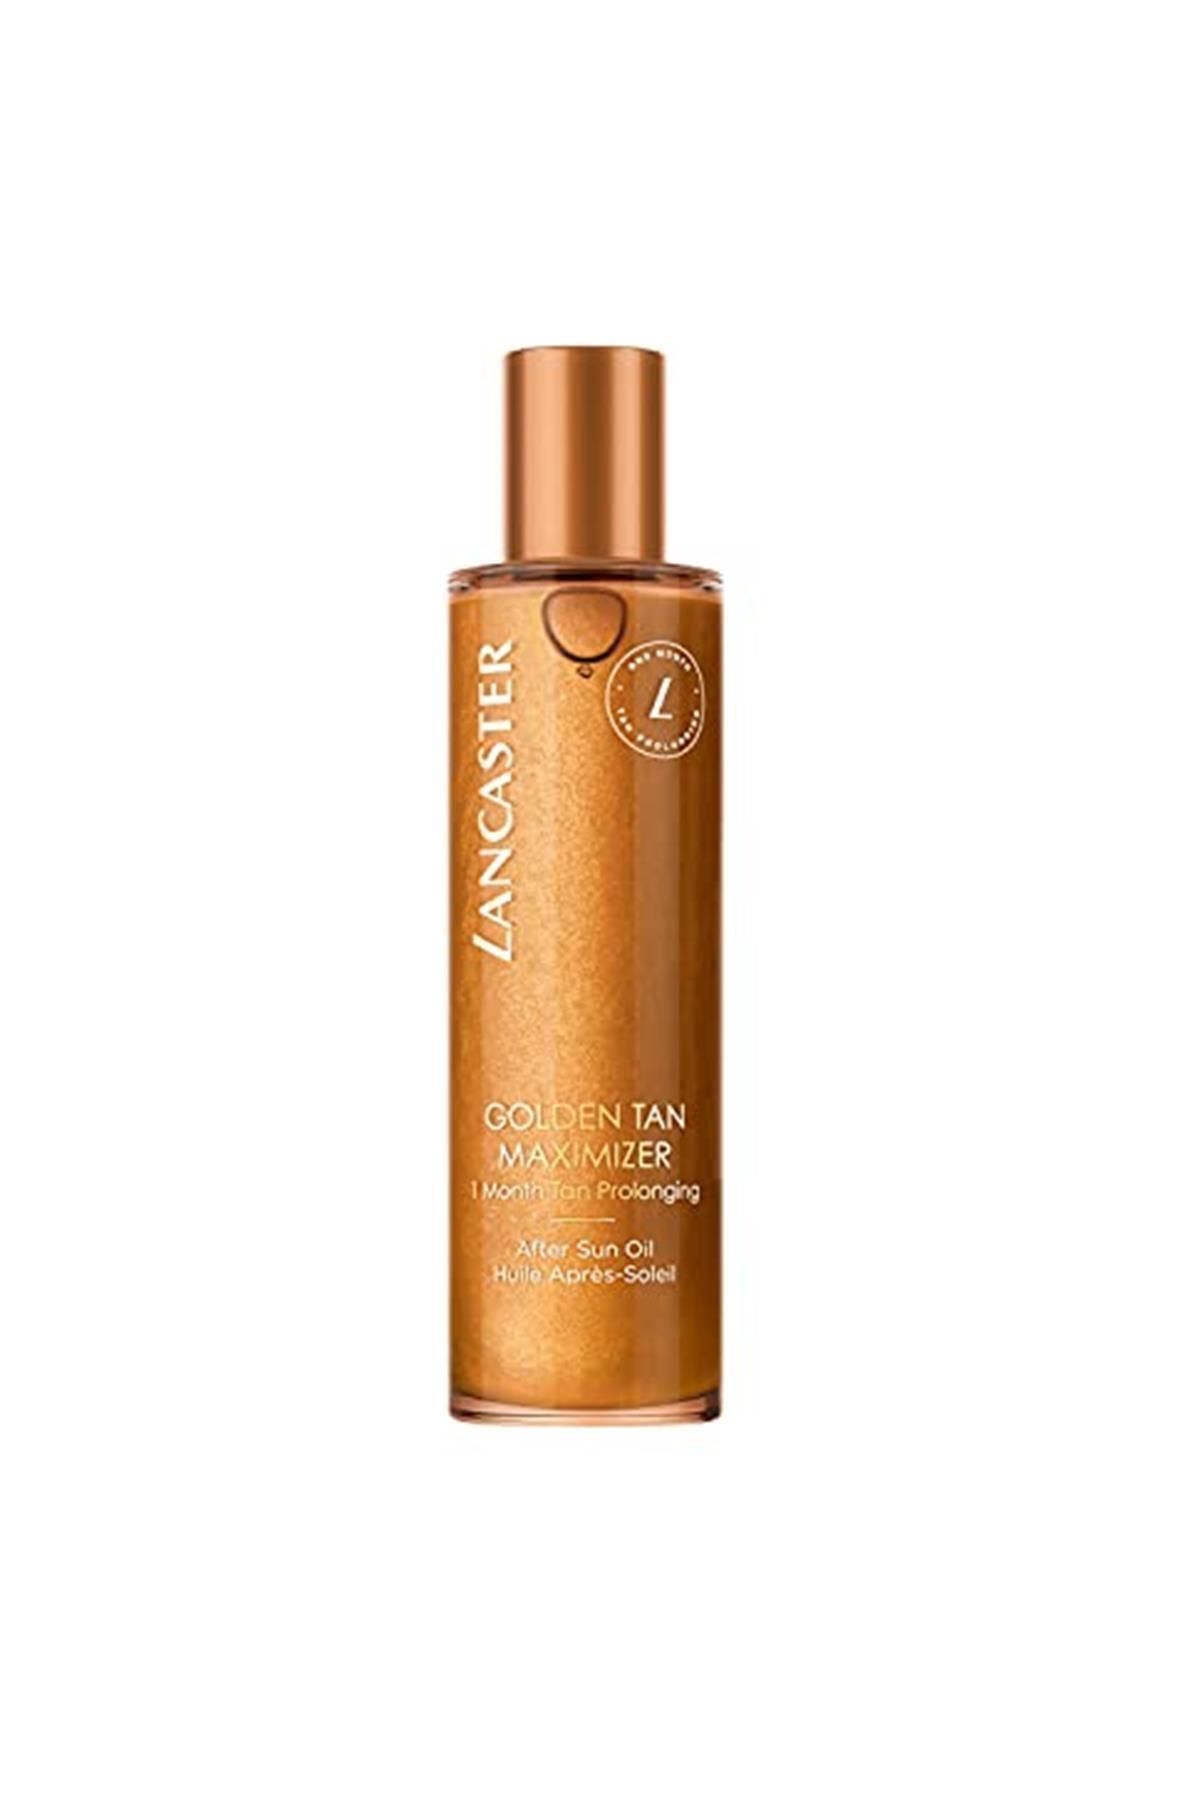 Lancaster Mustore - Golden Tan Maximizer After Sun Oil 150 Ml--live With Light